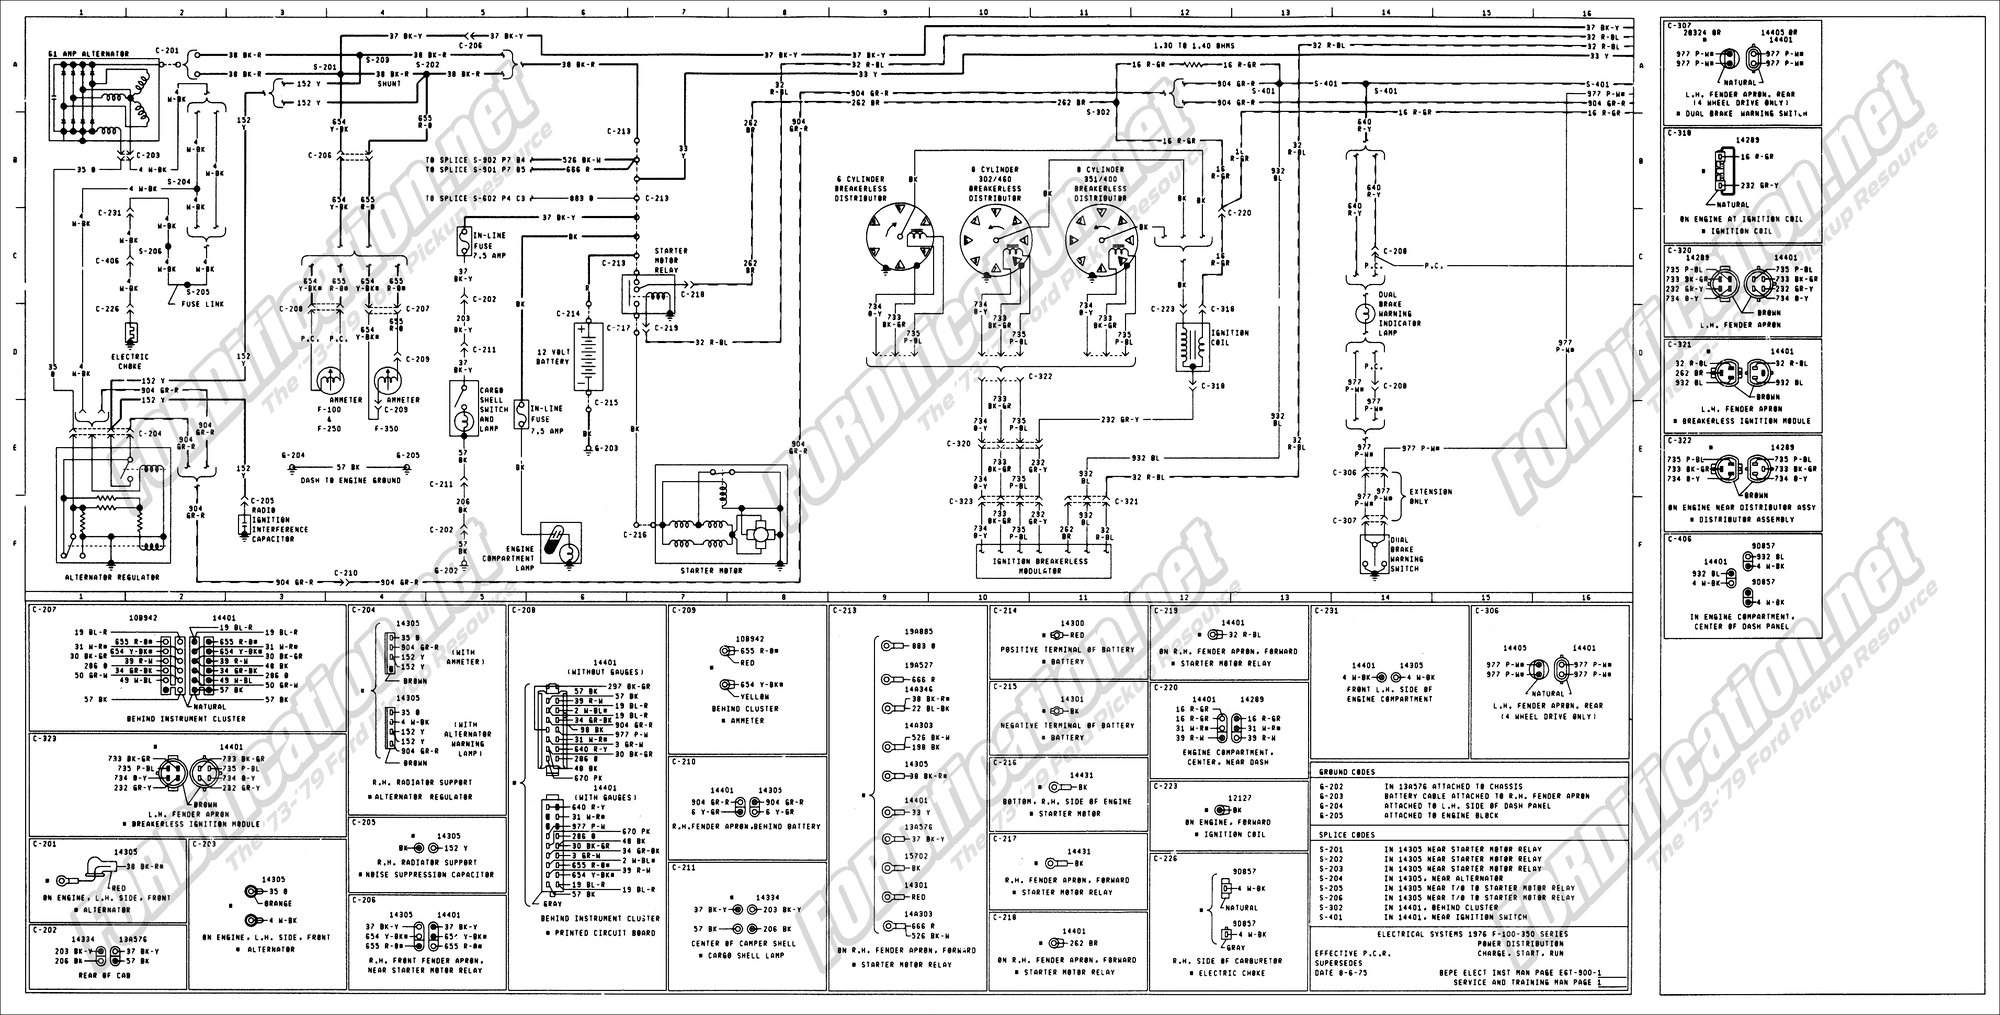 Wiring Diagram For Holley Electric Choke